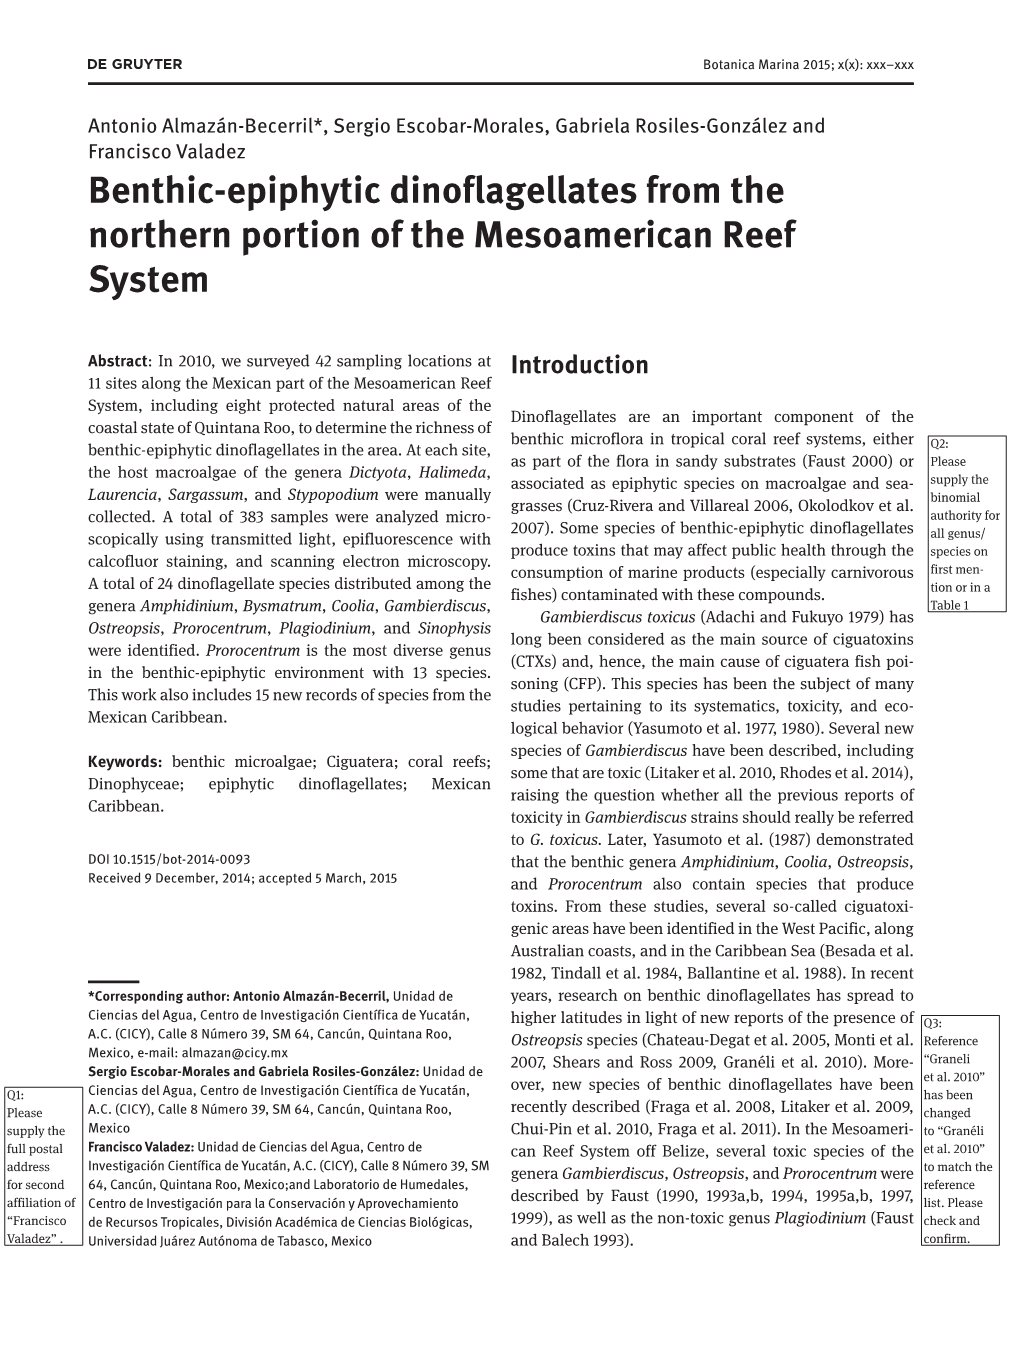 Benthic-Epiphytic Dinoflagellates from the Northern Portion of the Mesoamerican Reef System